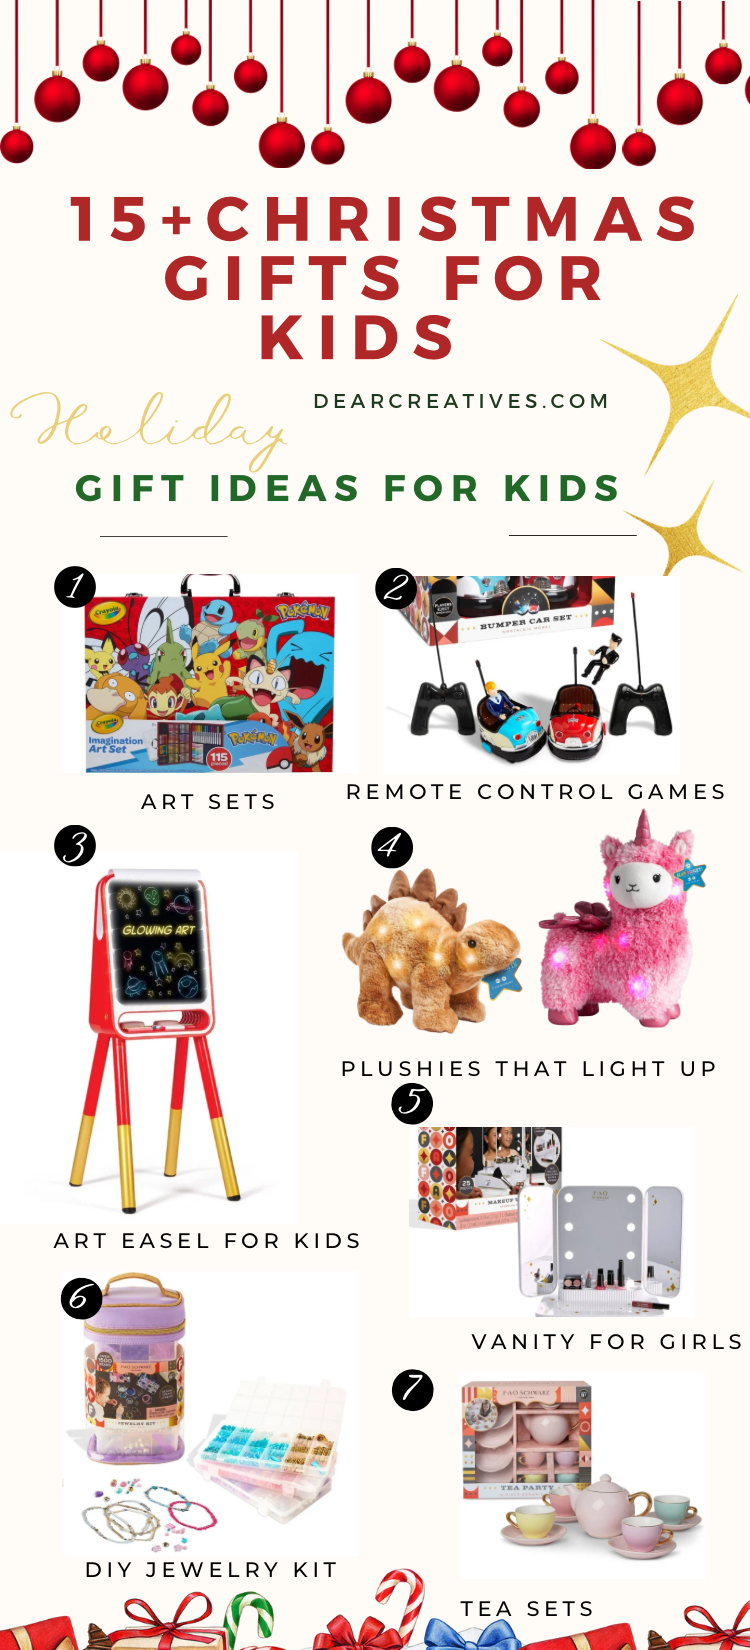 Christmas Gifts For Kids 15+ Gifts They’ll Love Receiving!